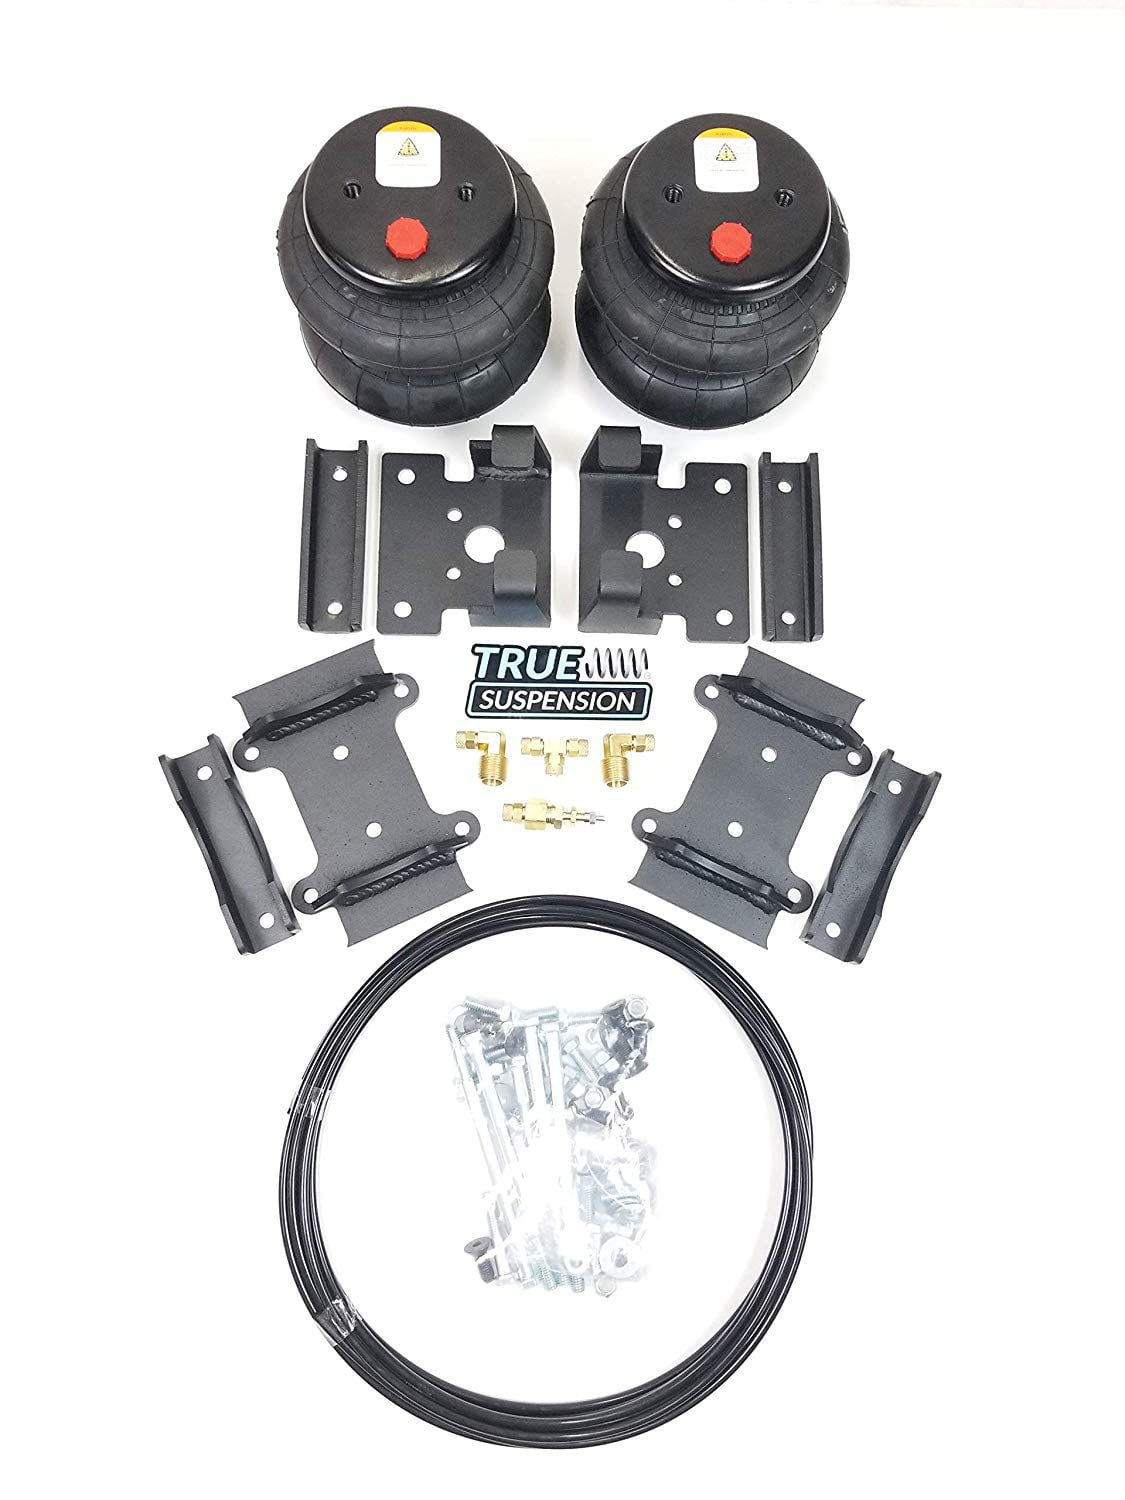 TS Fits Dodge 2500 4wd Pickup Truck 14-18 Towing Helper Assist Air Ride Suspension Kit rear coil spring suspension